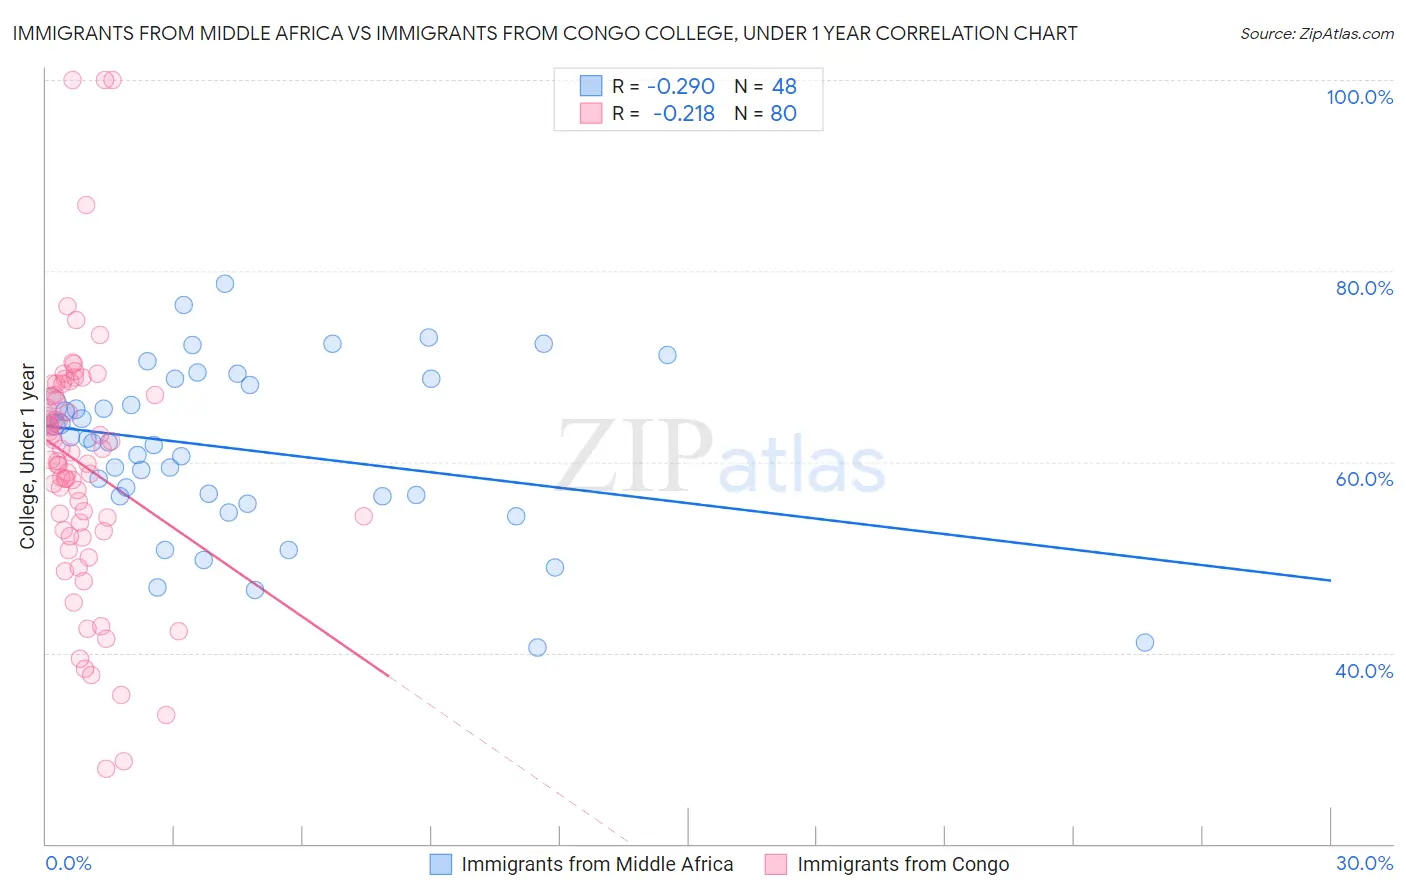 Immigrants from Middle Africa vs Immigrants from Congo College, Under 1 year